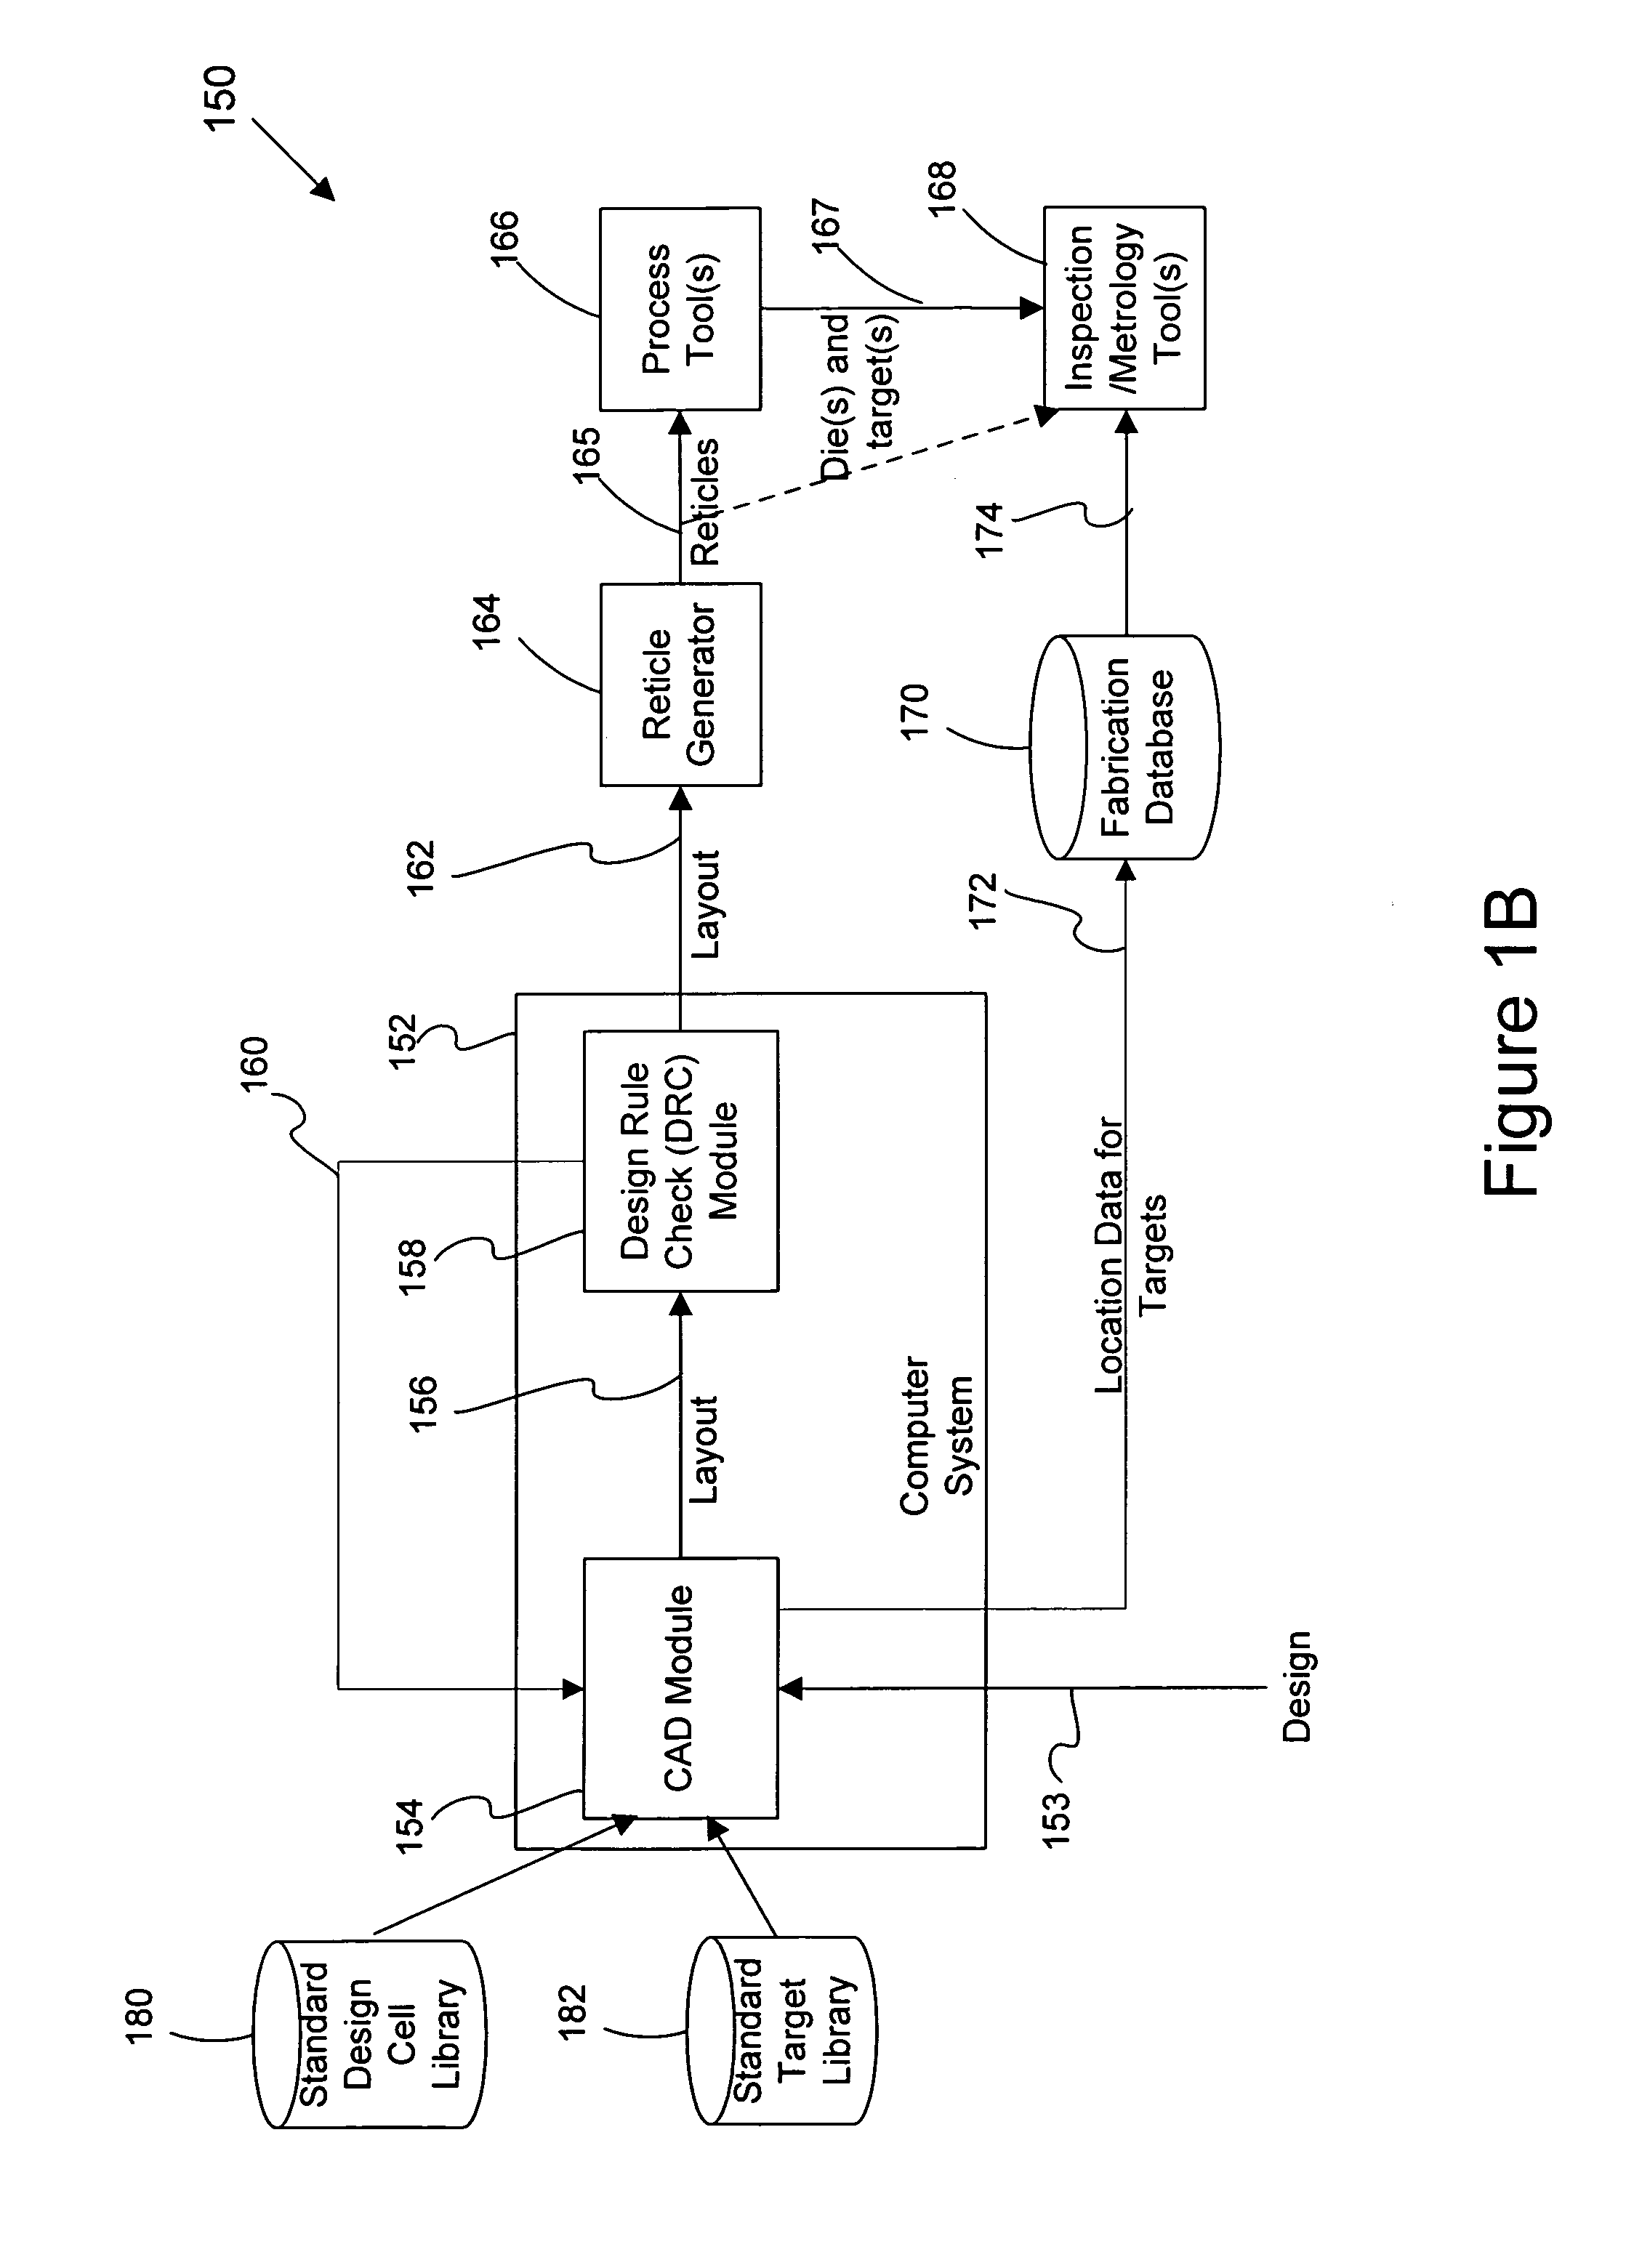 Apparatus and methods for providing in-chip microtargets for metrology or inspection